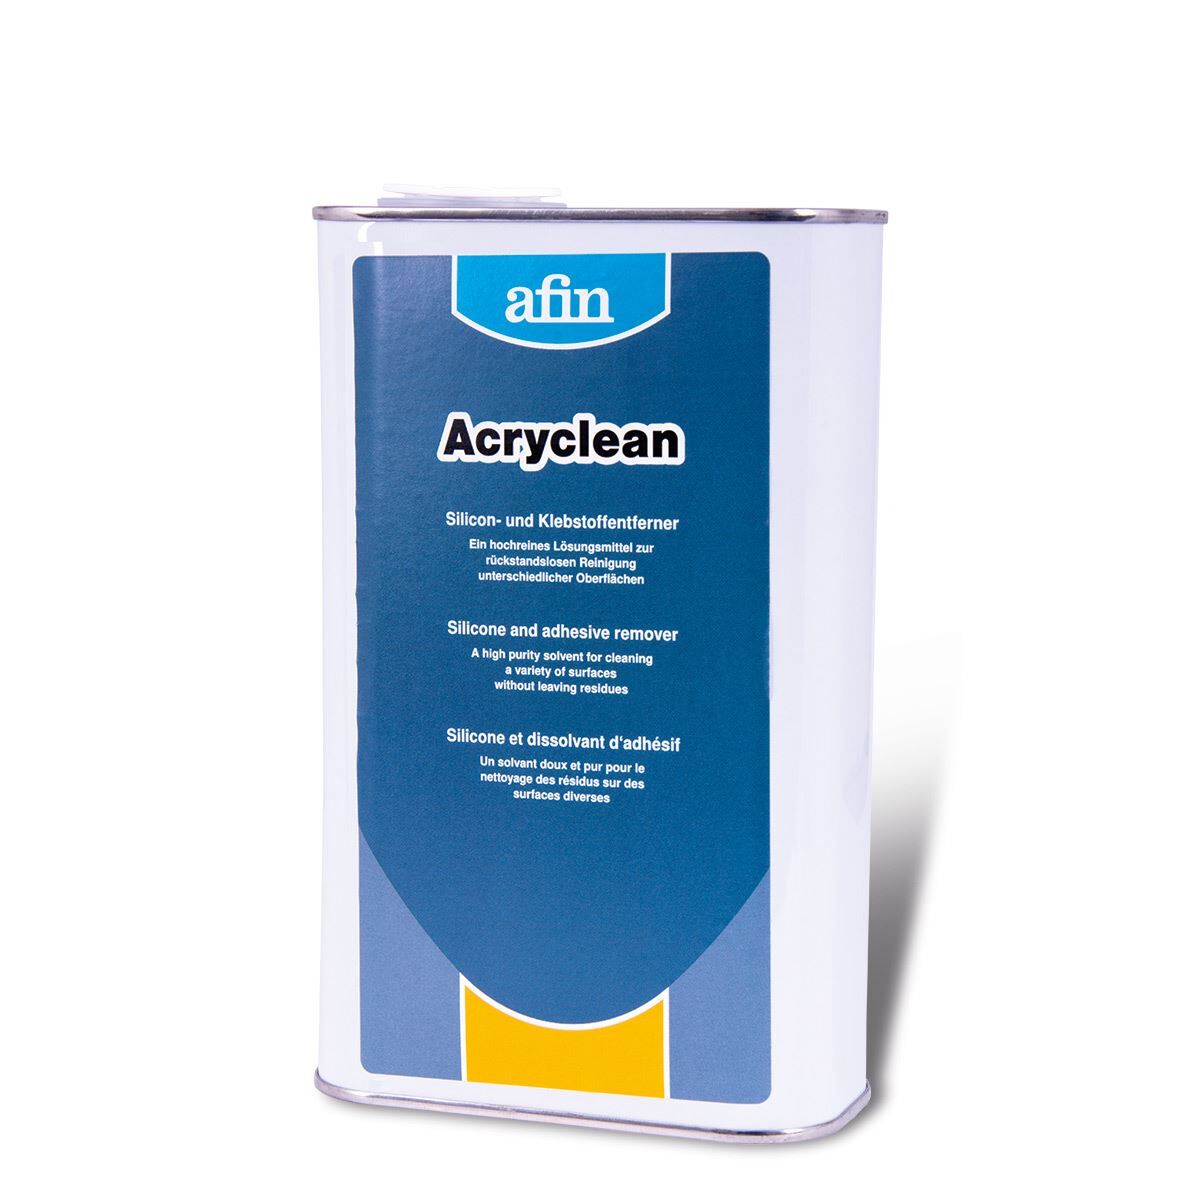 afin Acryclean - Siliconentferner 1 l